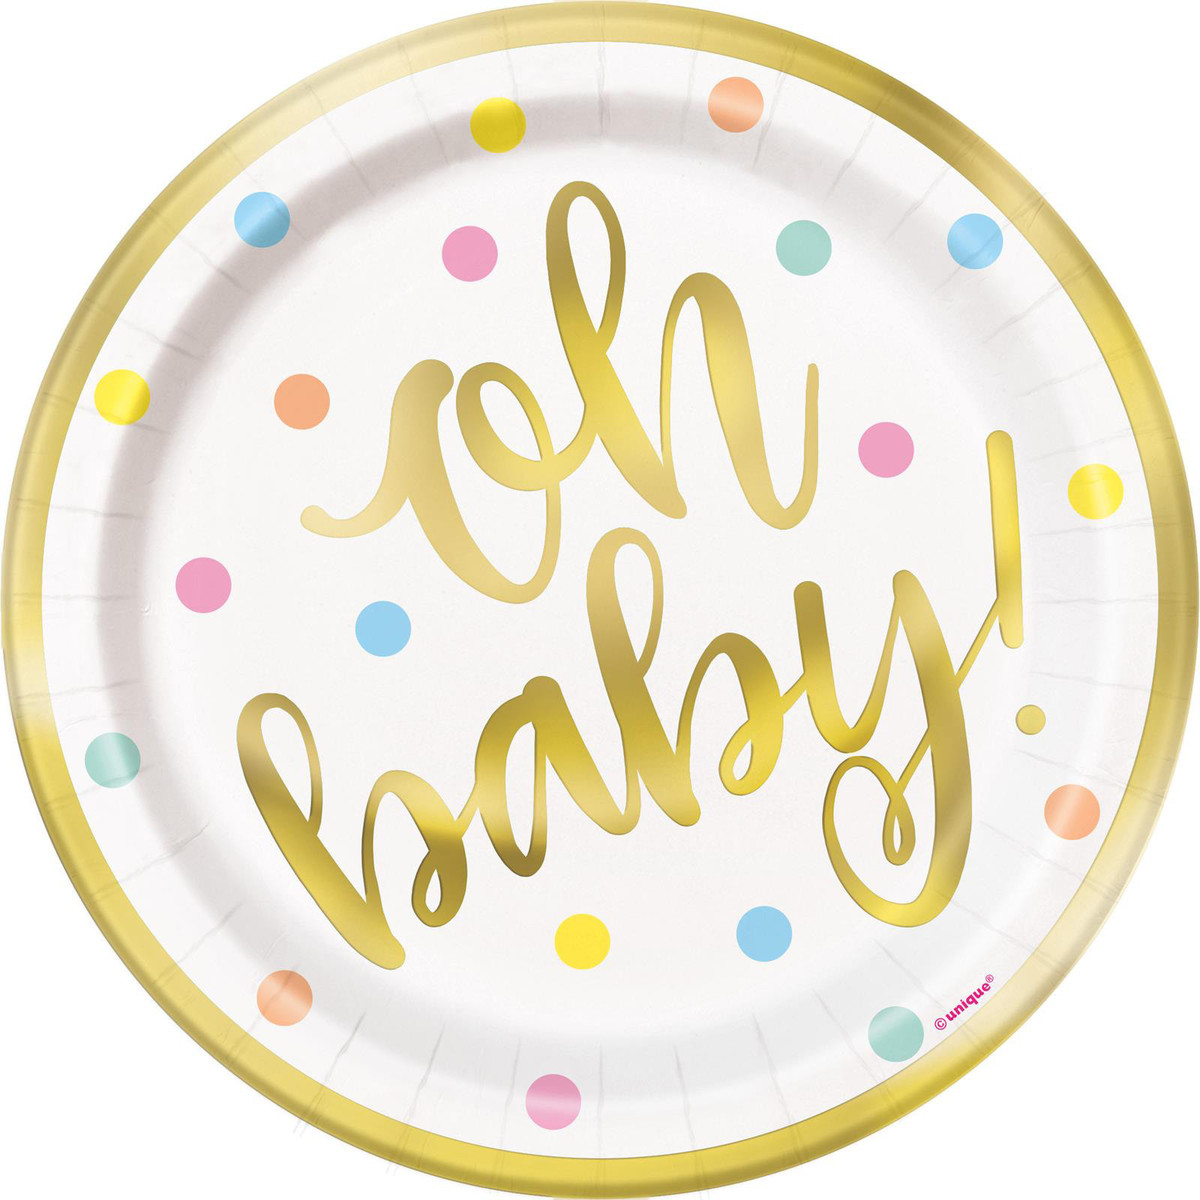 Oh Baby 8 x 18cm Foil Stamped Paper Plates